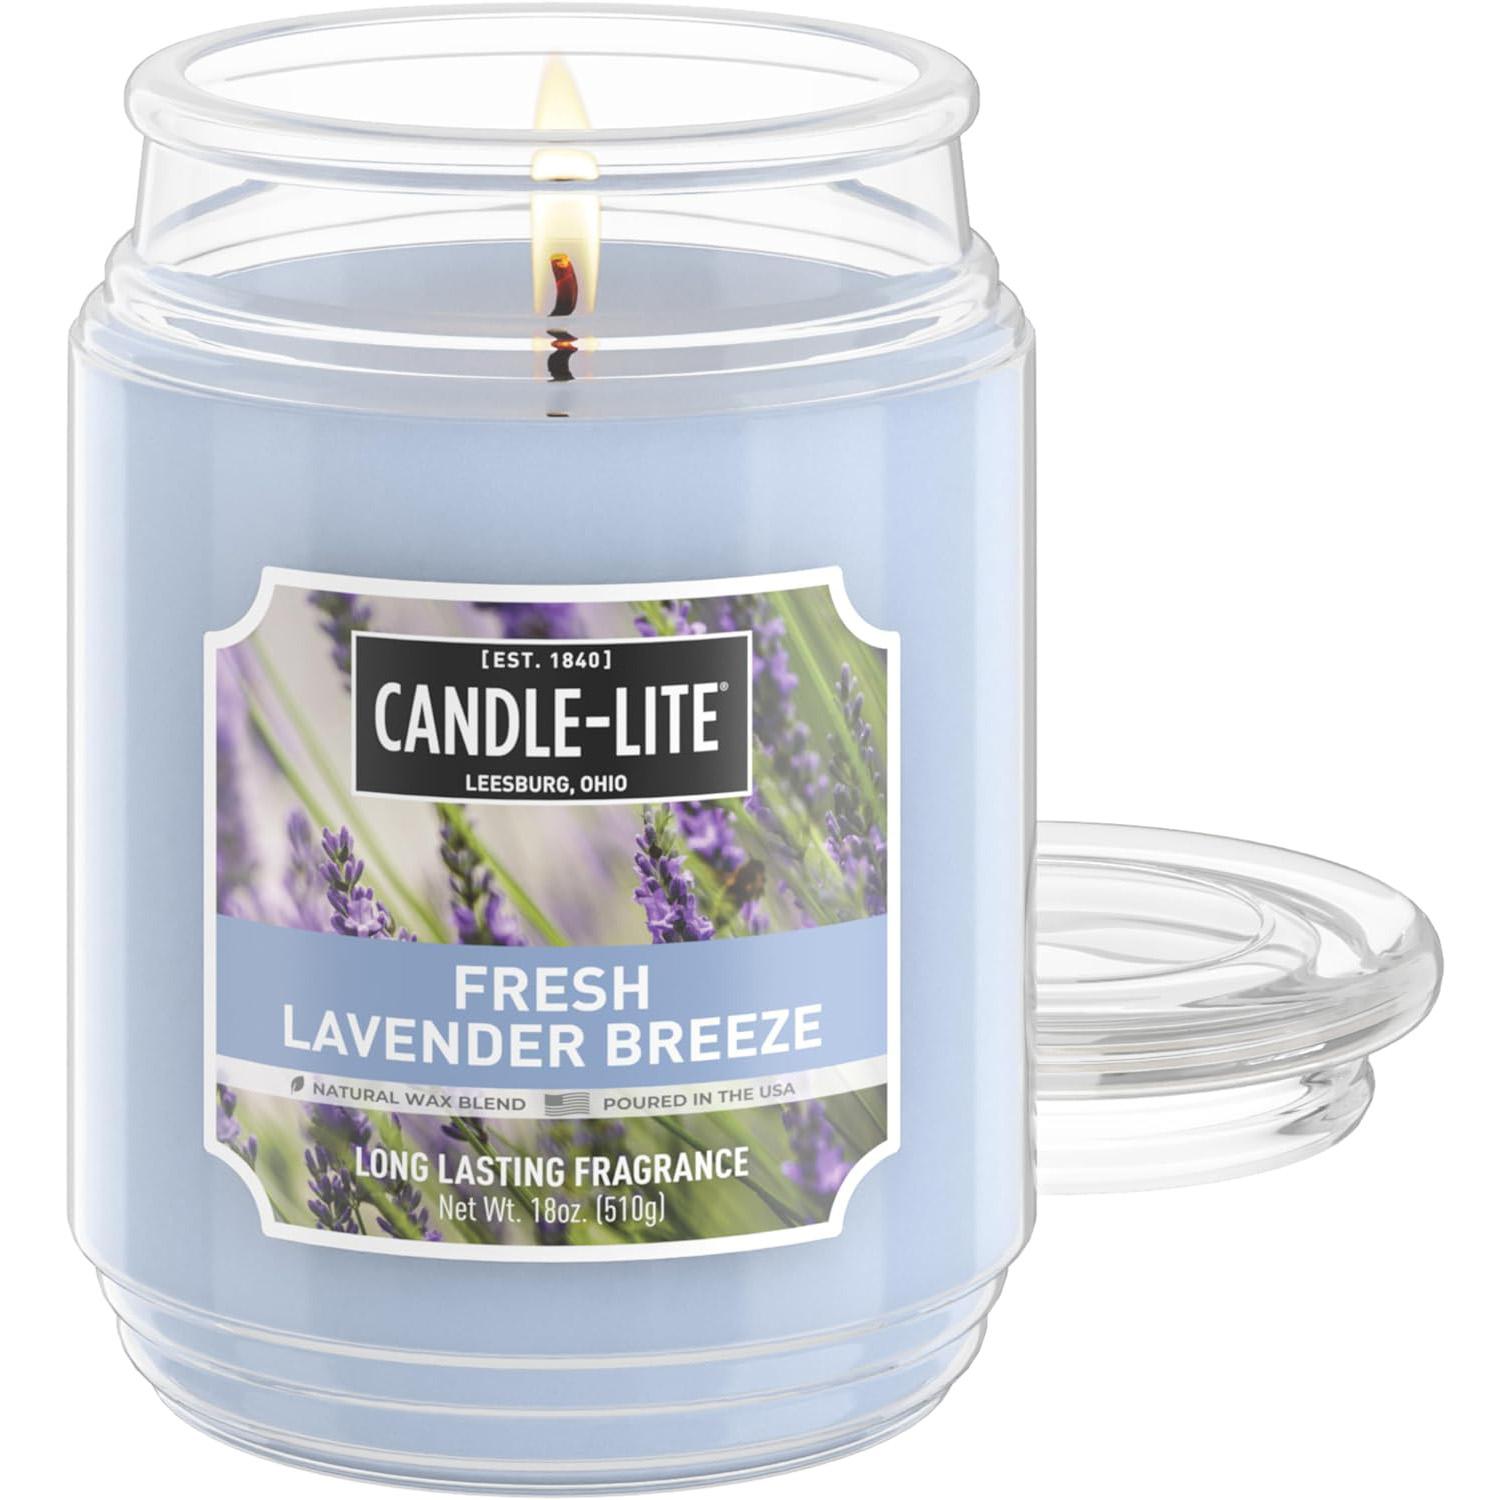 Candle-Lite Scented Everyday Aromatherapy Candle for $5.69 Shipped